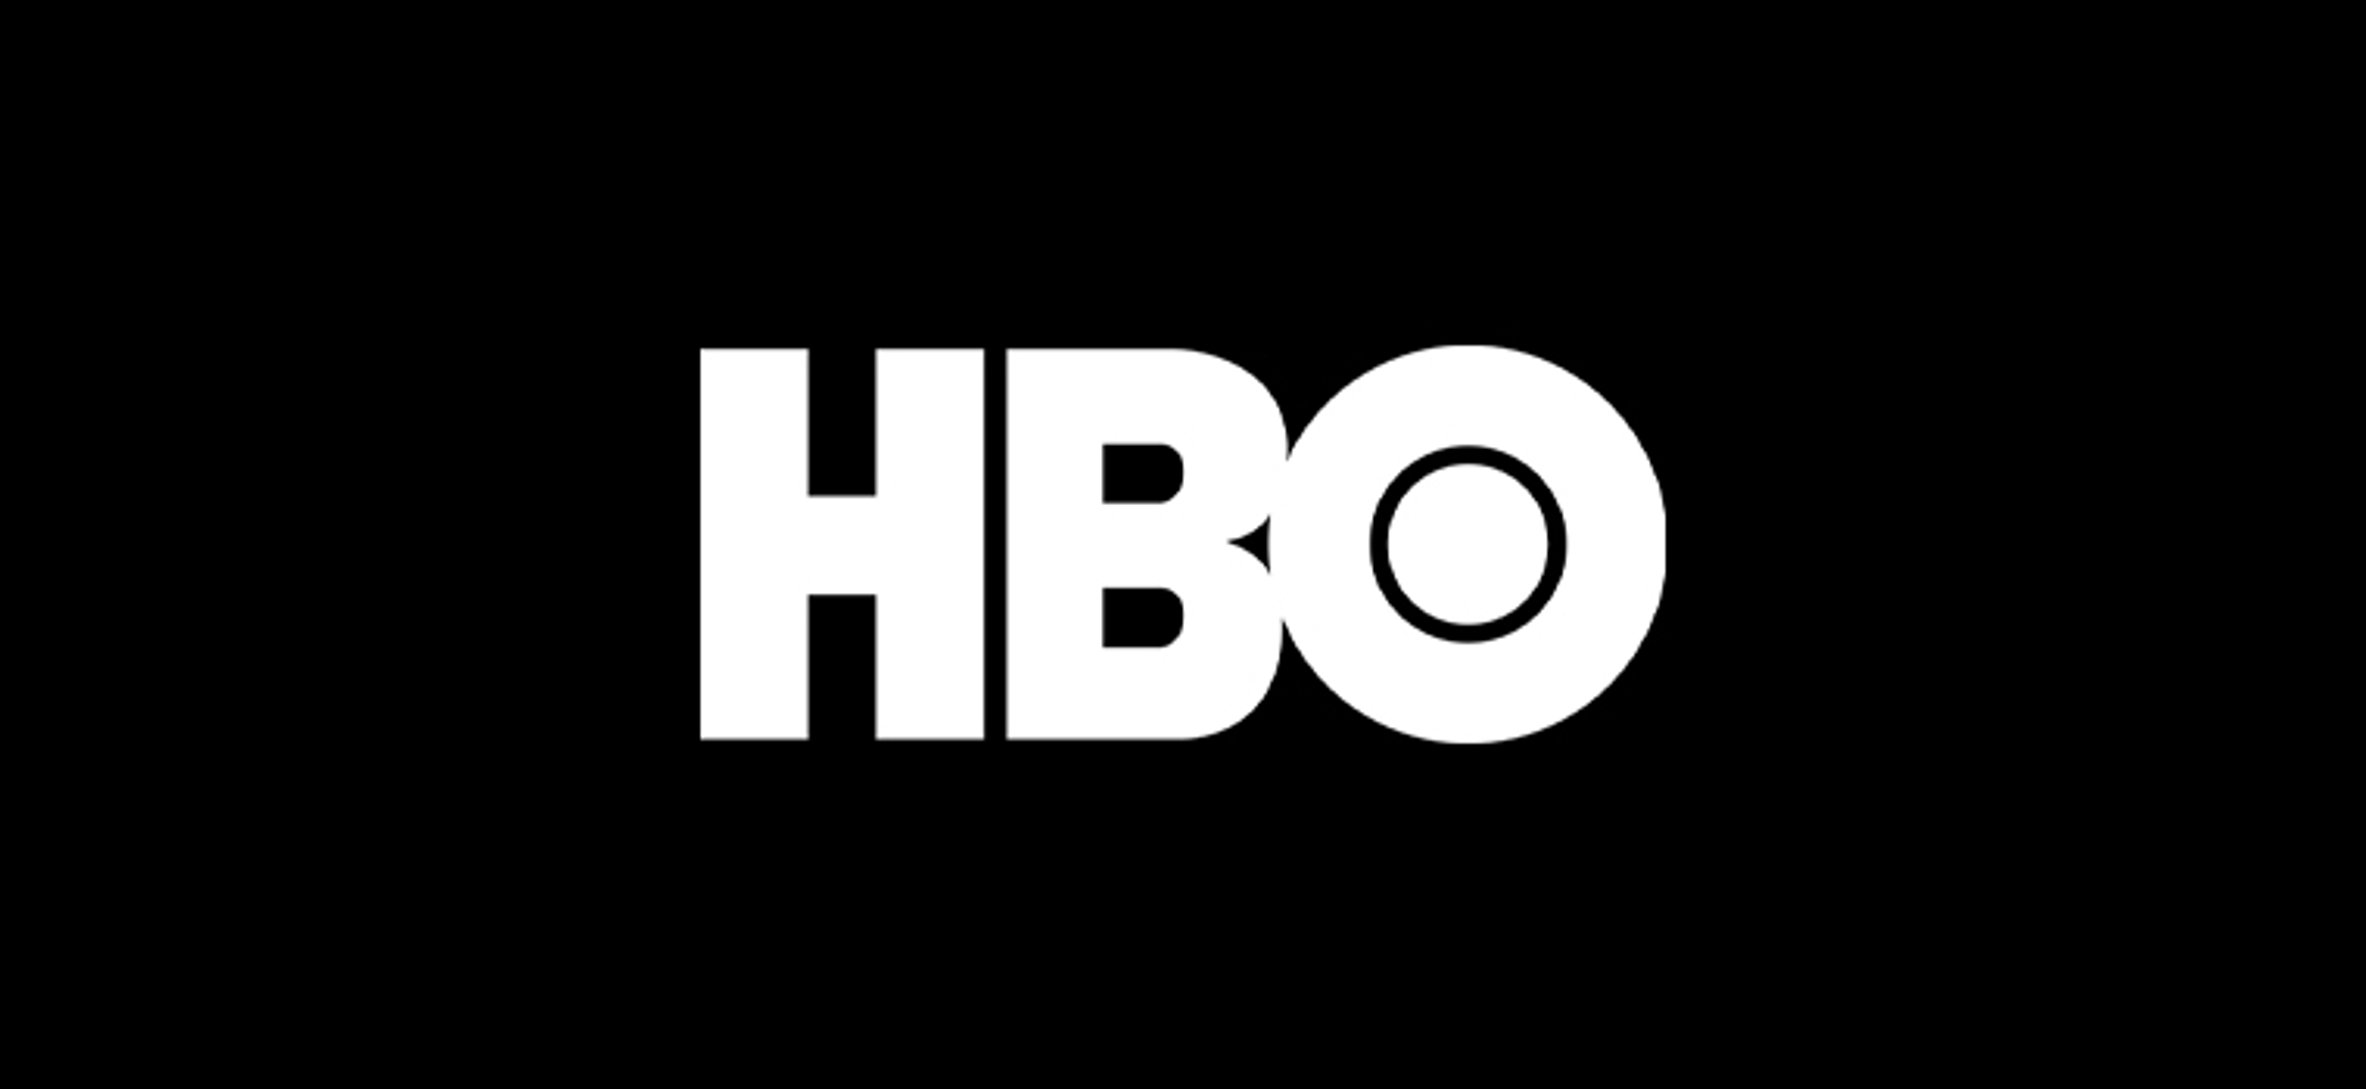 HBO's The Outsider is Casting for Fast Food, Riders, Hippies & Construction Crew!